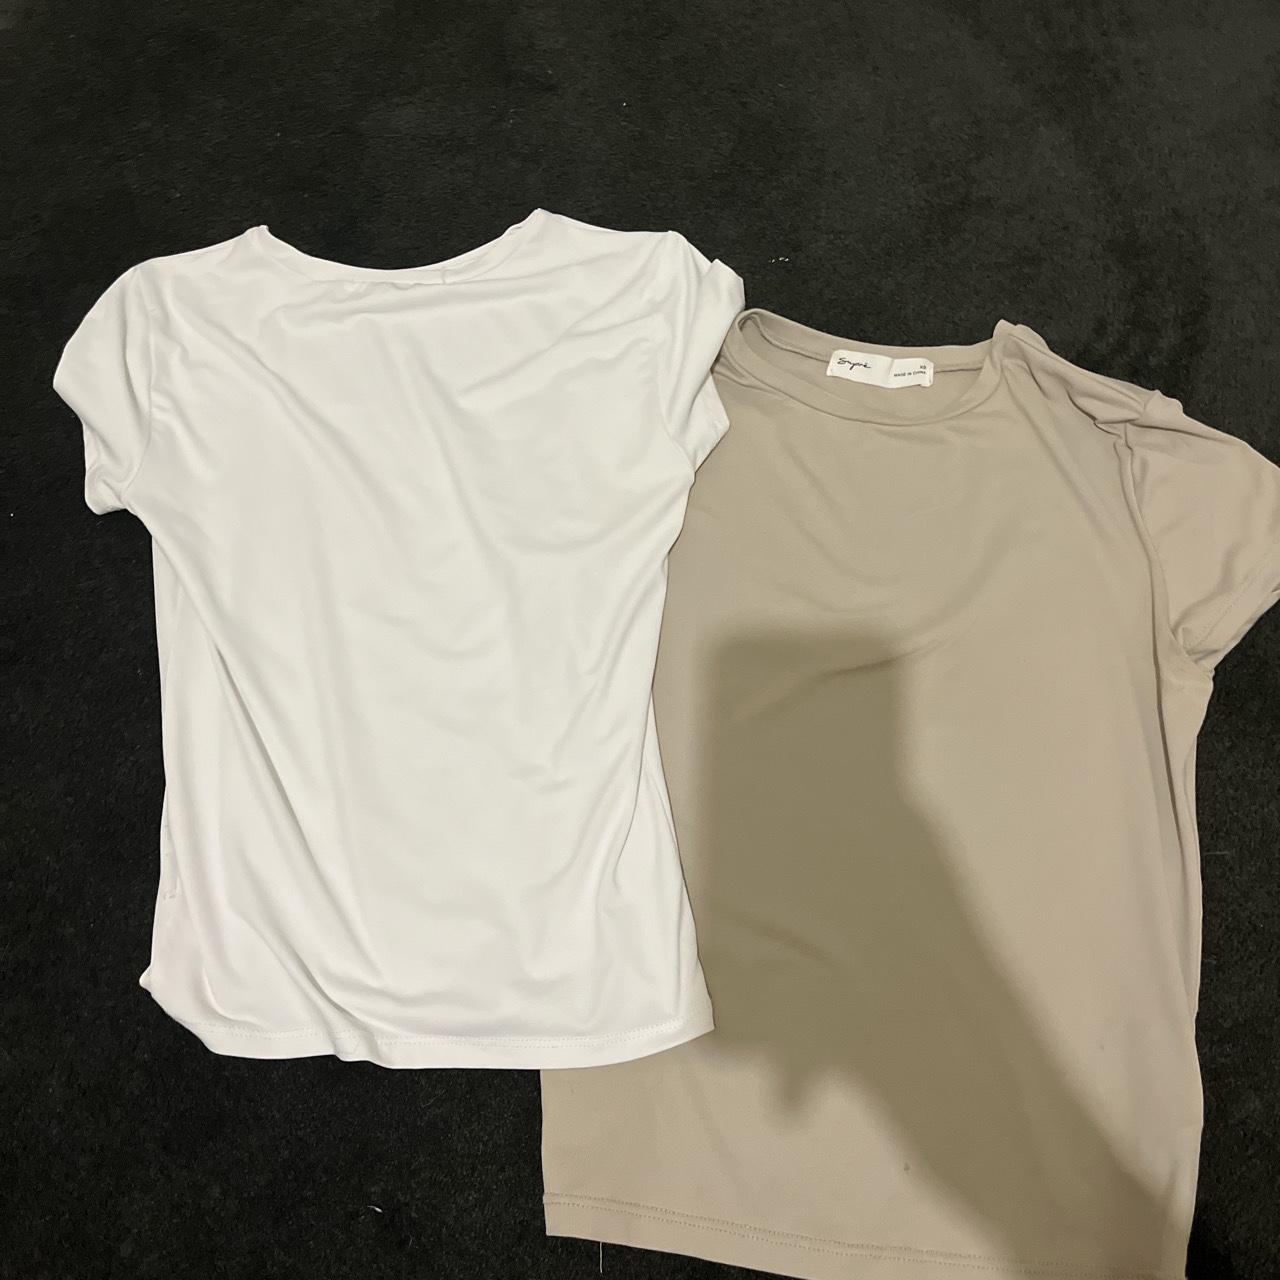 2 supre tops luxe collection no flaws selling both... - Depop